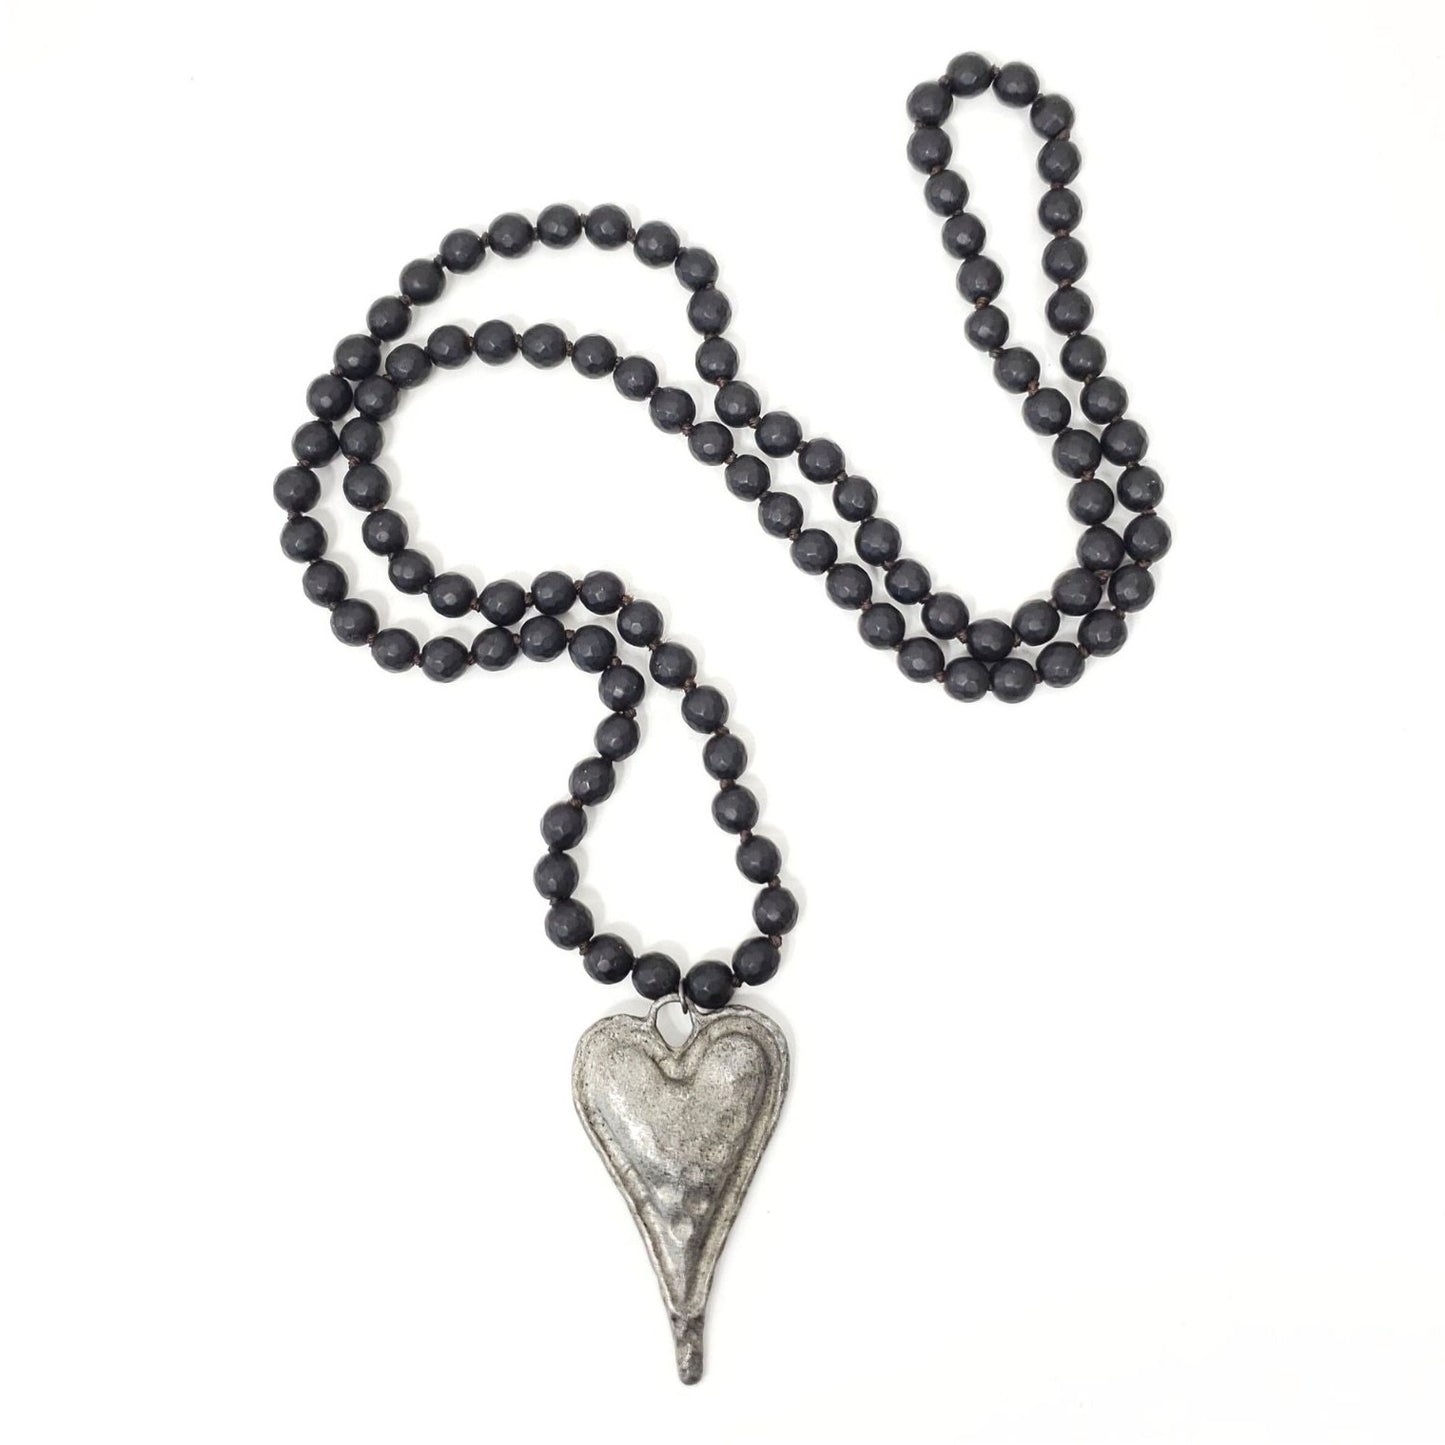 Black Onyx Antique Heart Necklace for inner-strength